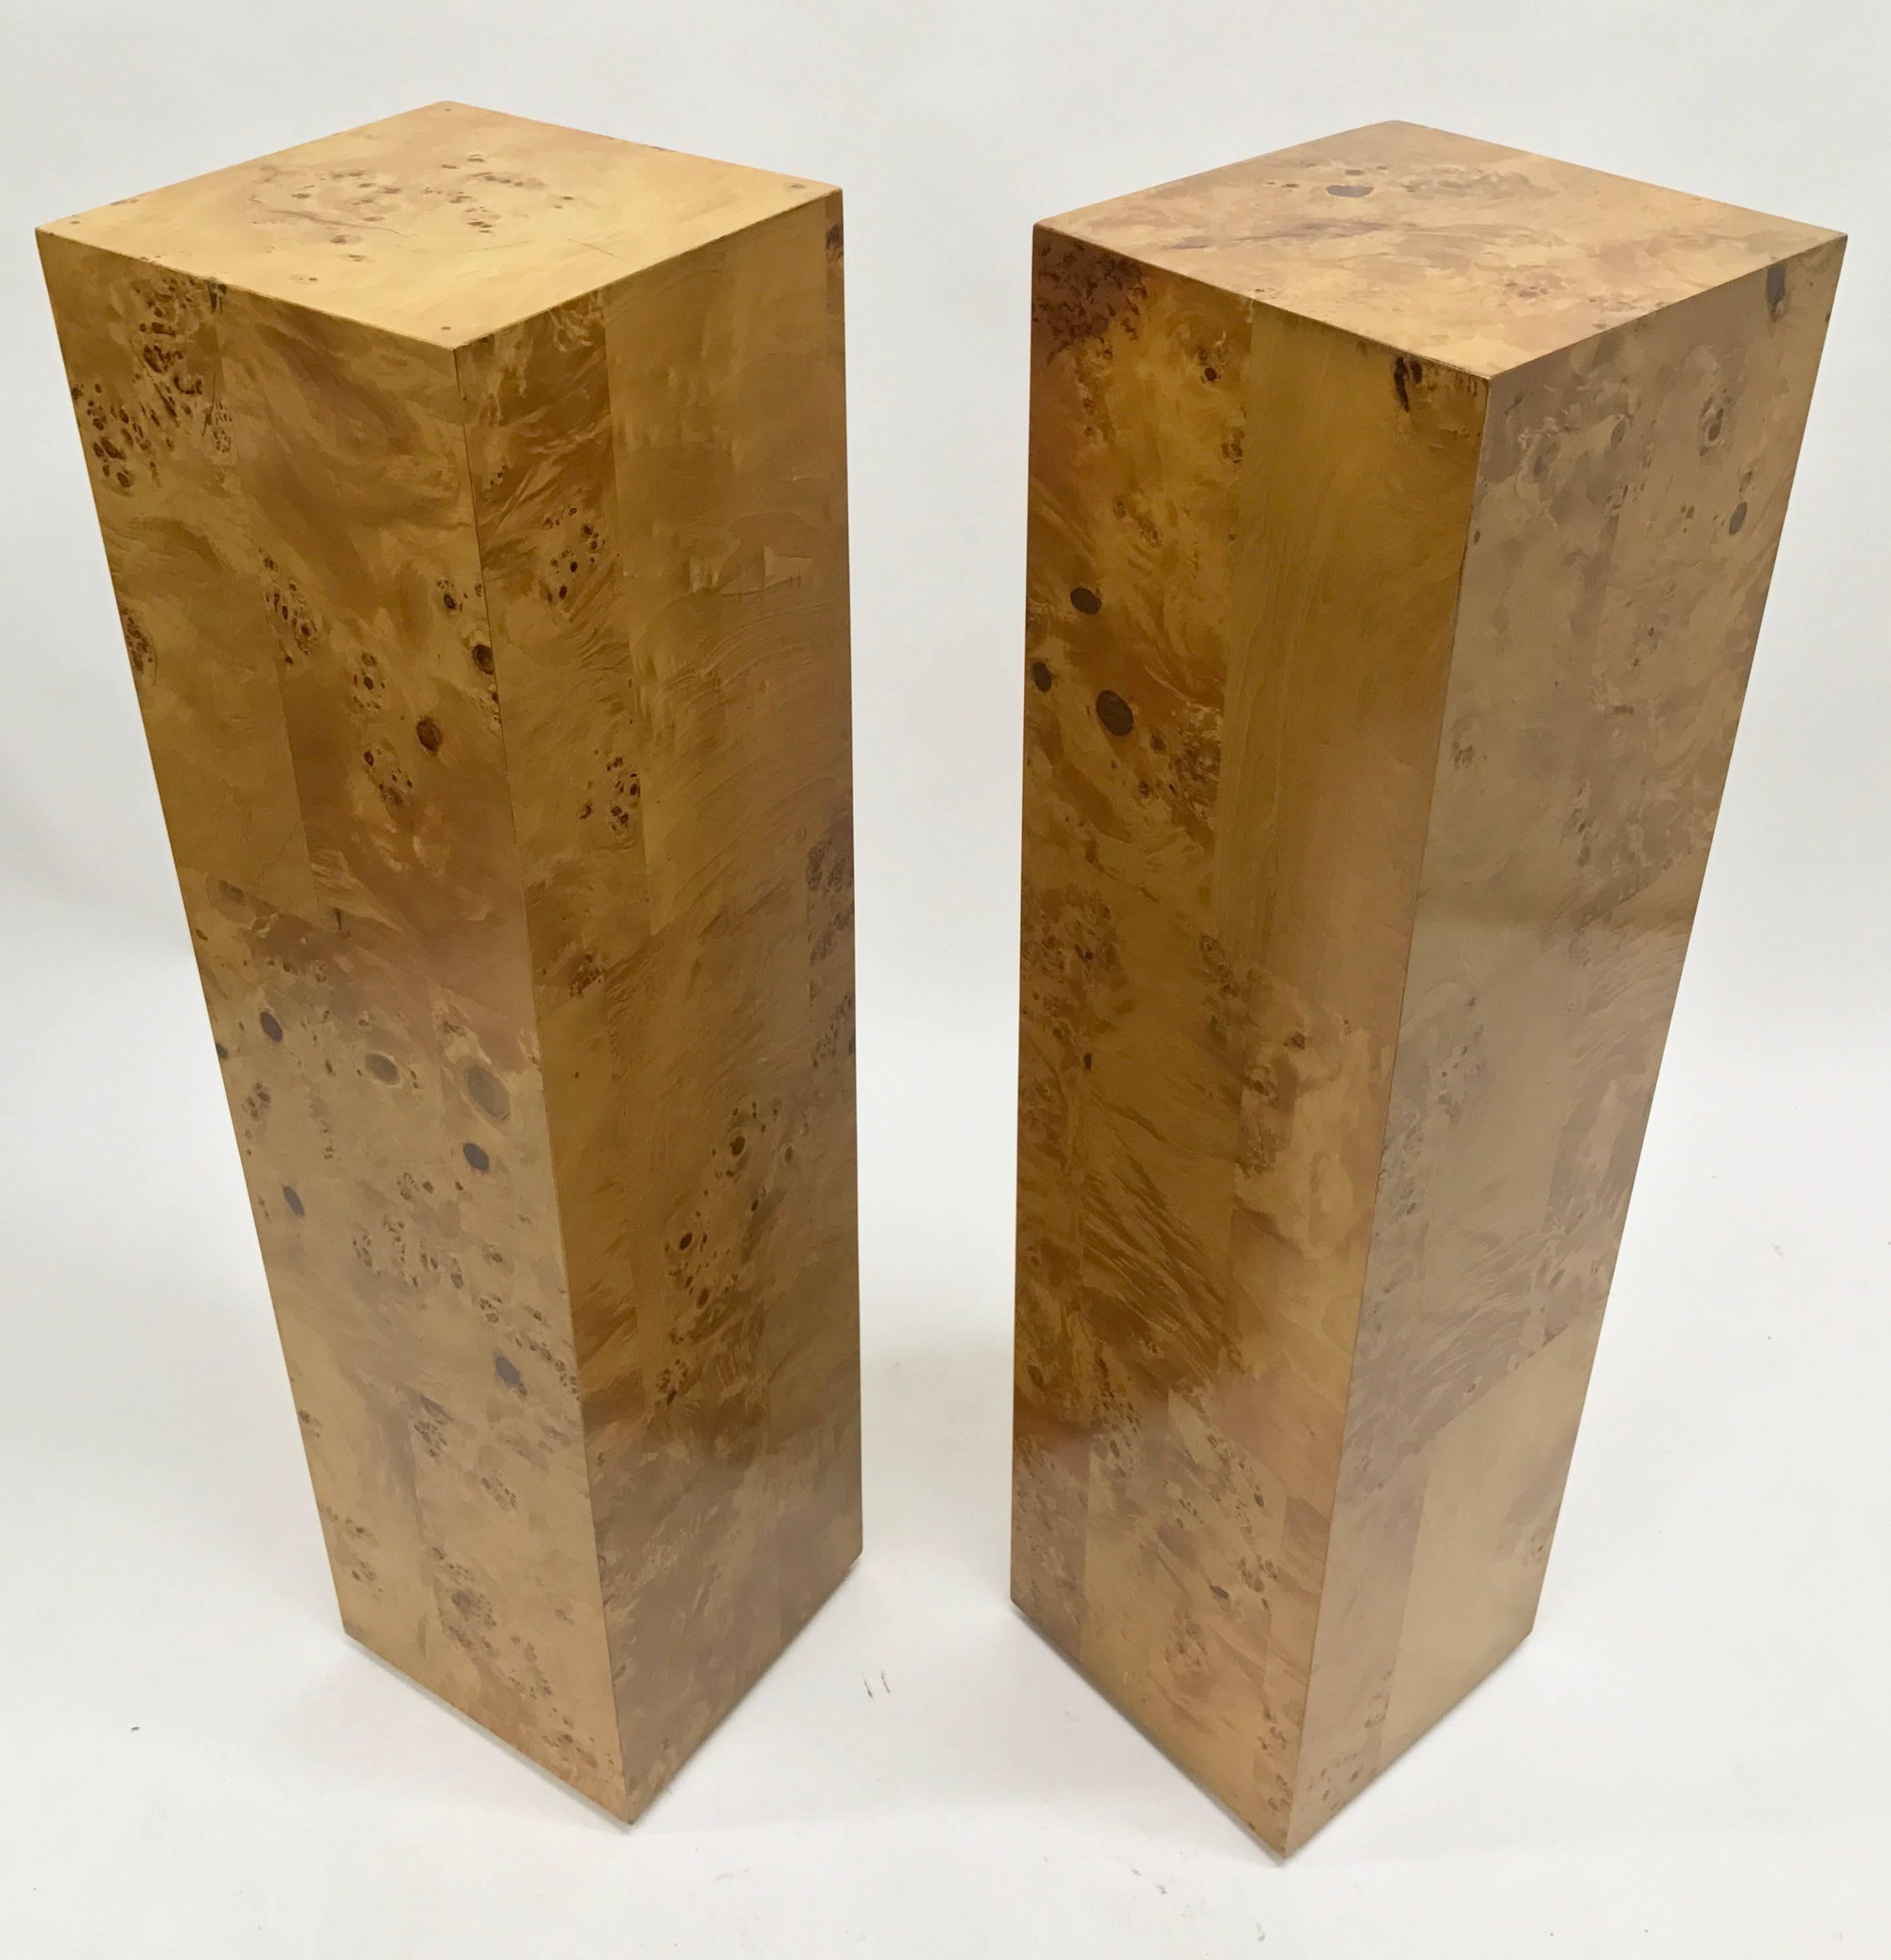 Milo Baughman Pair of Burl Wood Pedestals In Good Condition For Sale In Lake Success, NY